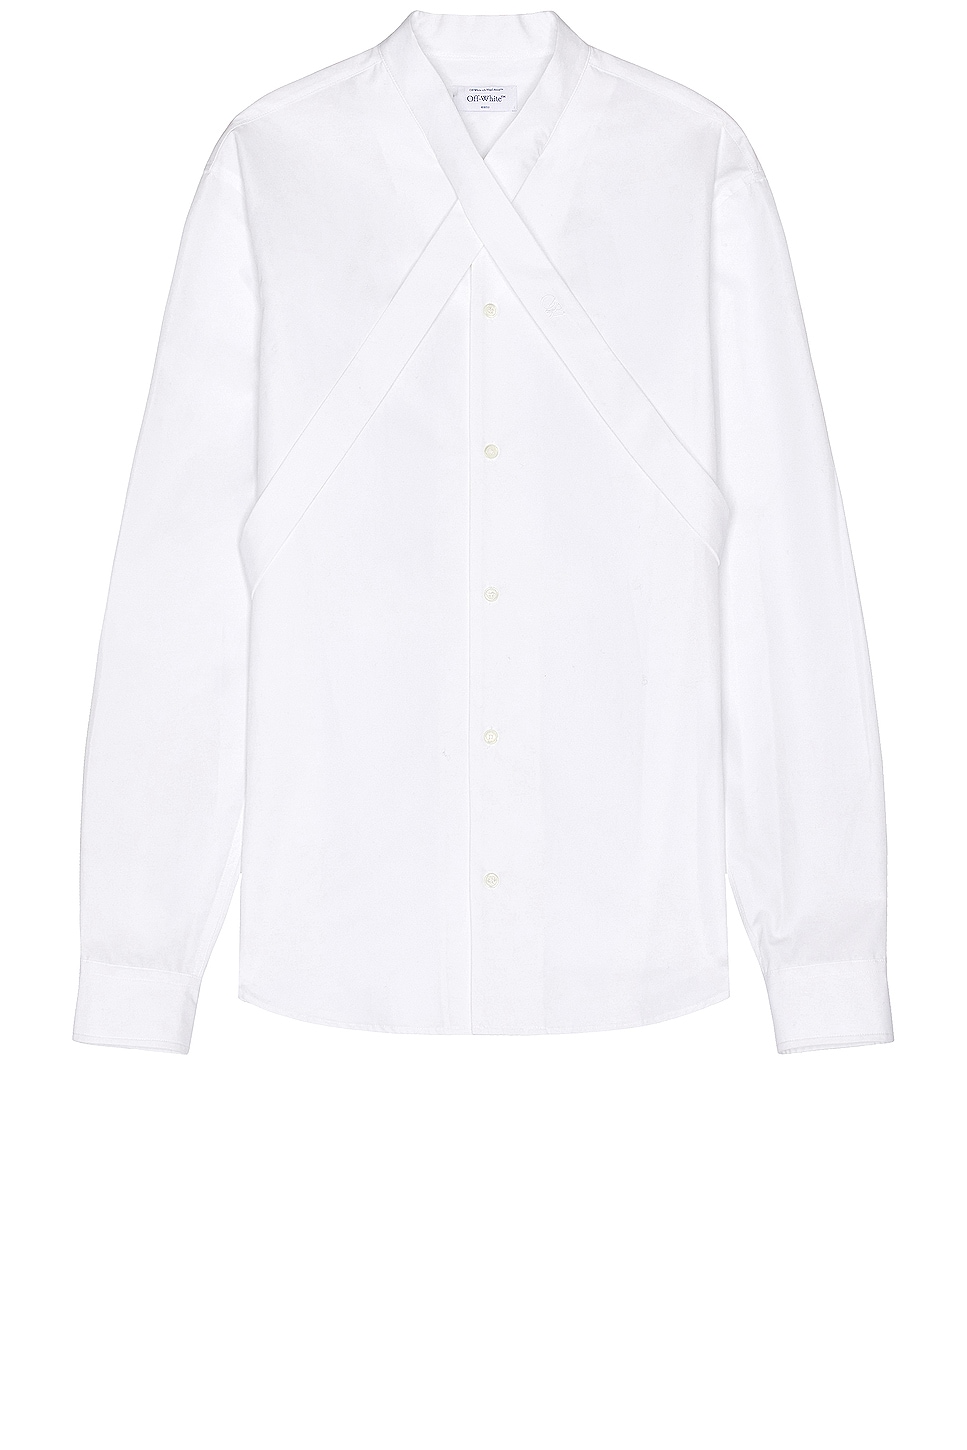 Image 1 of OFF-WHITE Collar Shirt in White